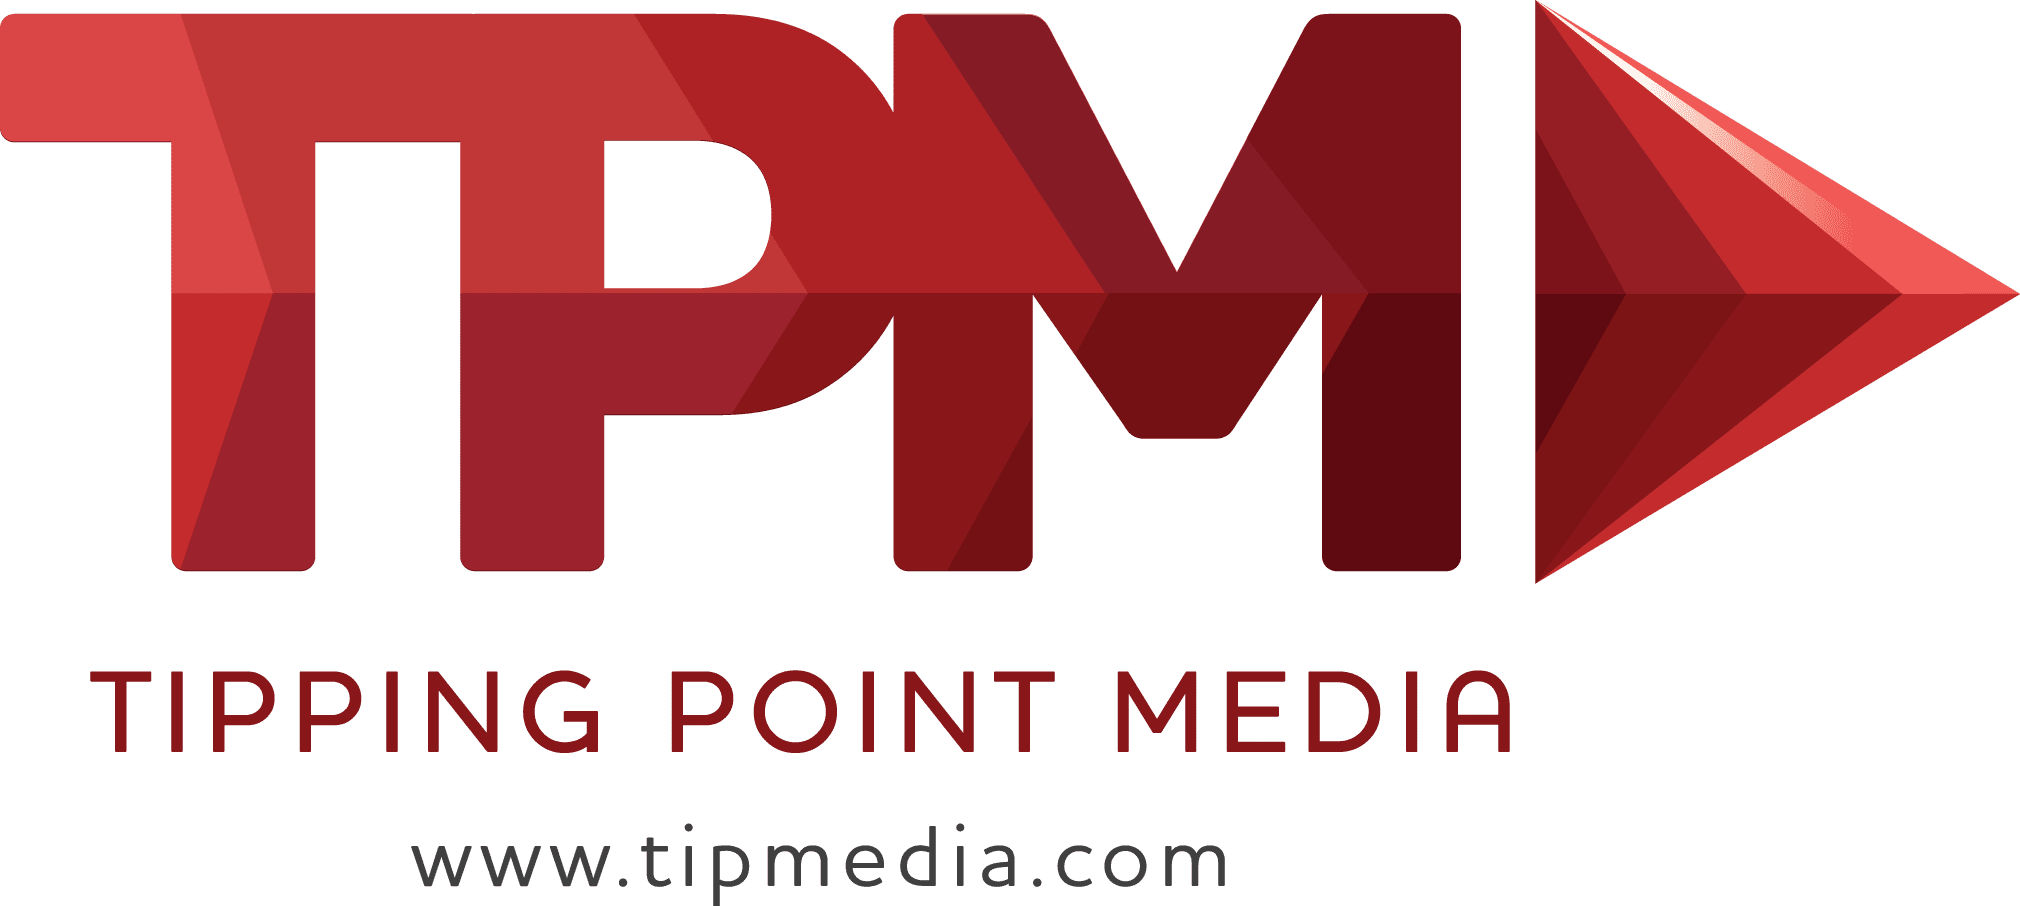 Tipping Point Media